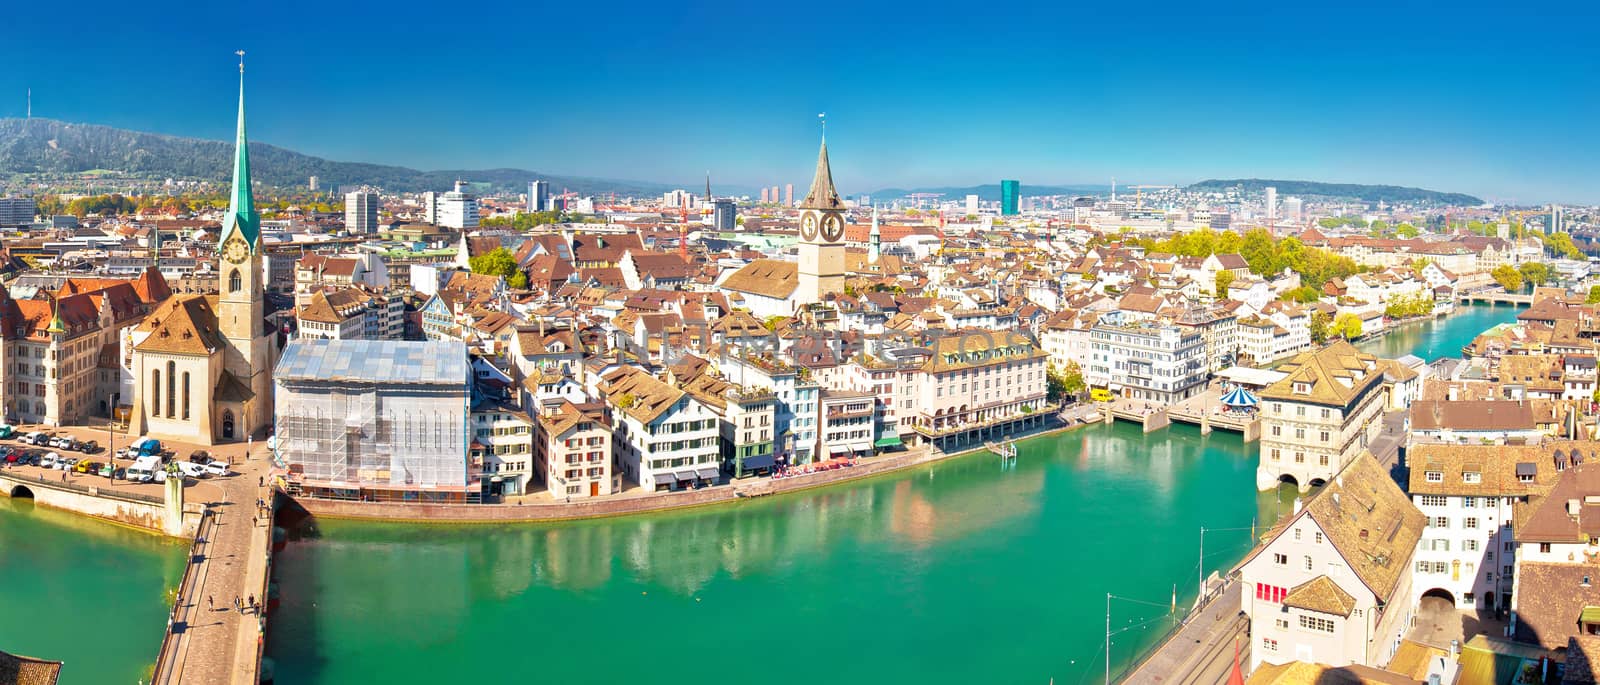 Zurich and Limmat river waterfront aerial panoramic view by xbrchx